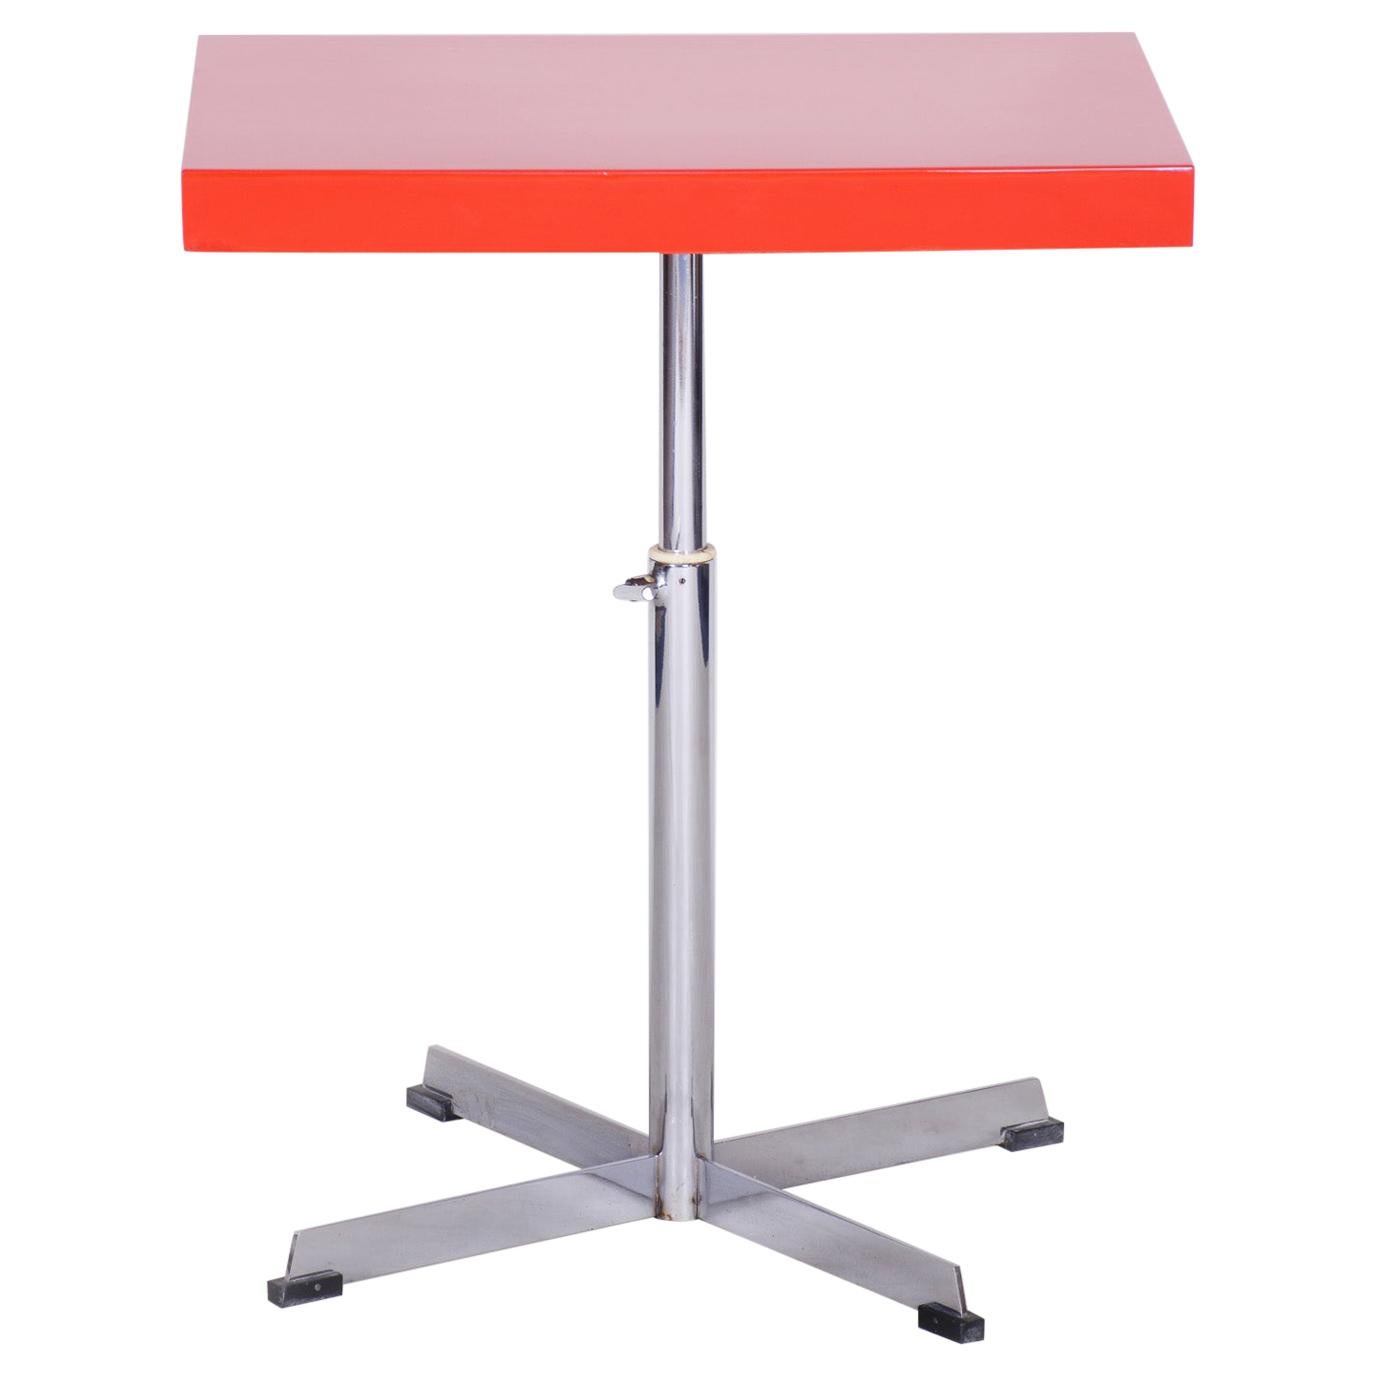 20th Century Small Restored Red Chrome Bauhaus Table, Adjustable Height, 1930s For Sale